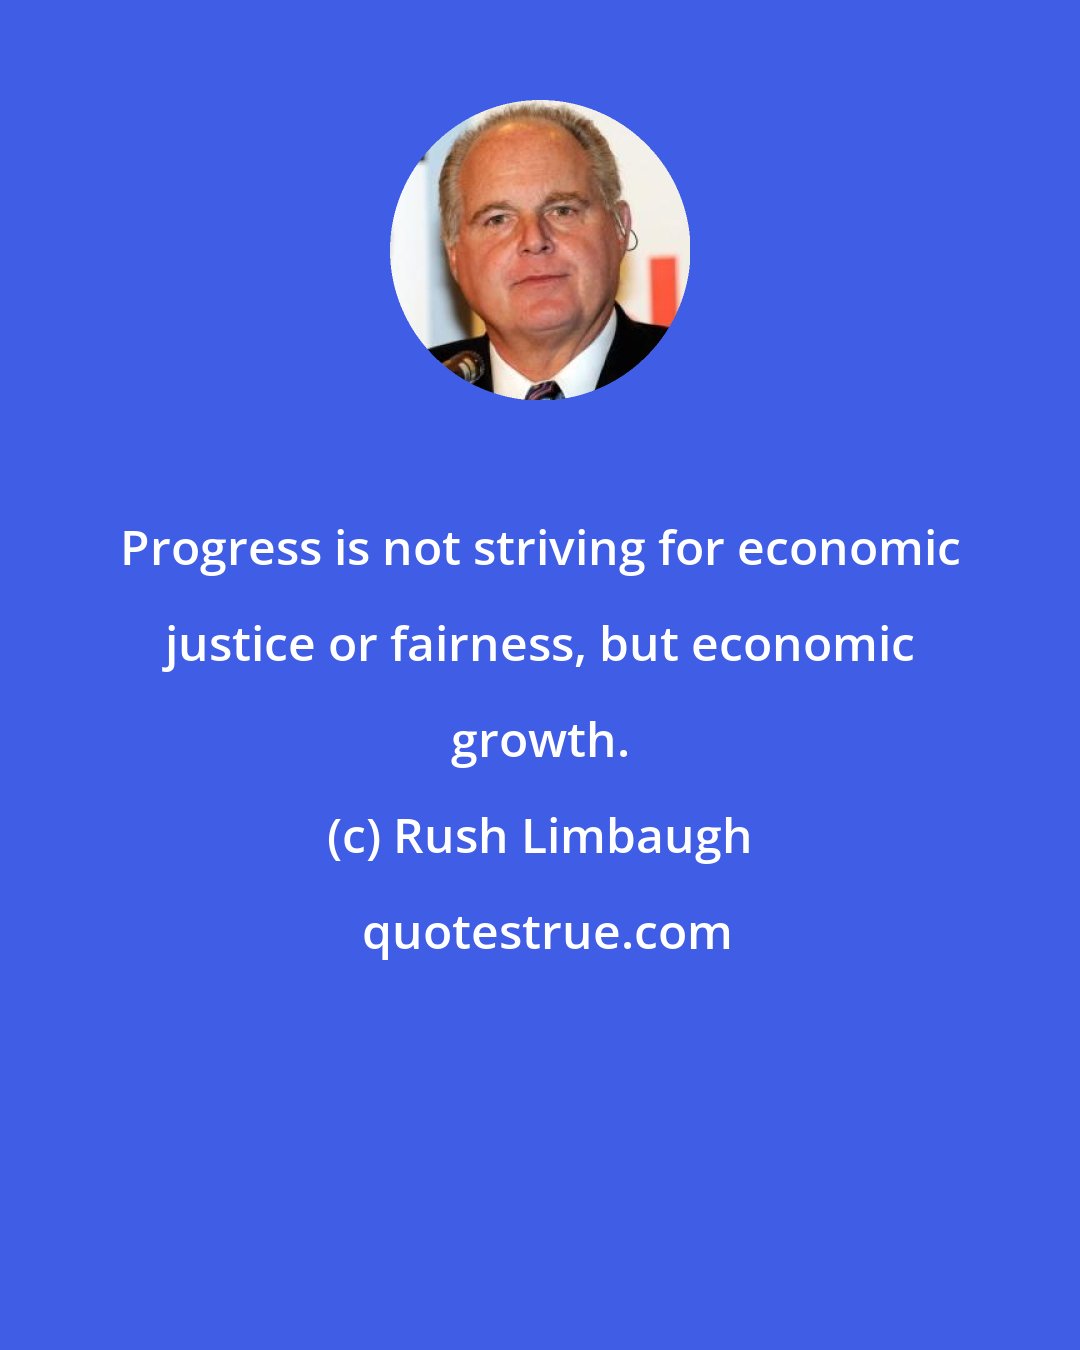 Rush Limbaugh: Progress is not striving for economic justice or fairness, but economic growth.